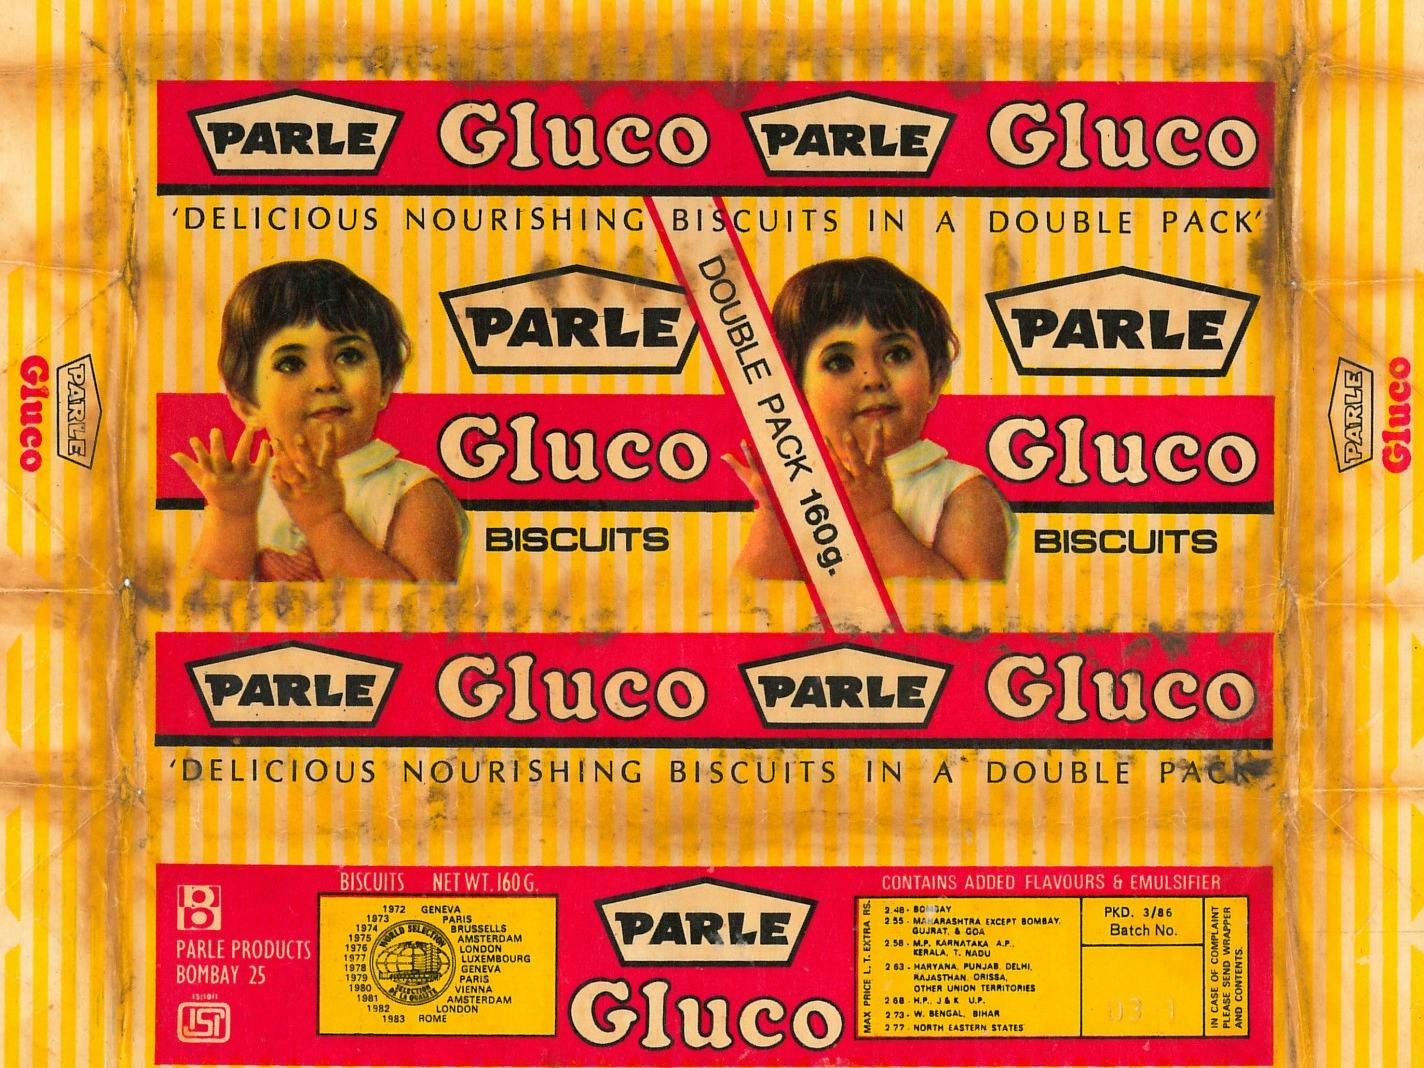 Even Parle-G Isn’t Immune to Change